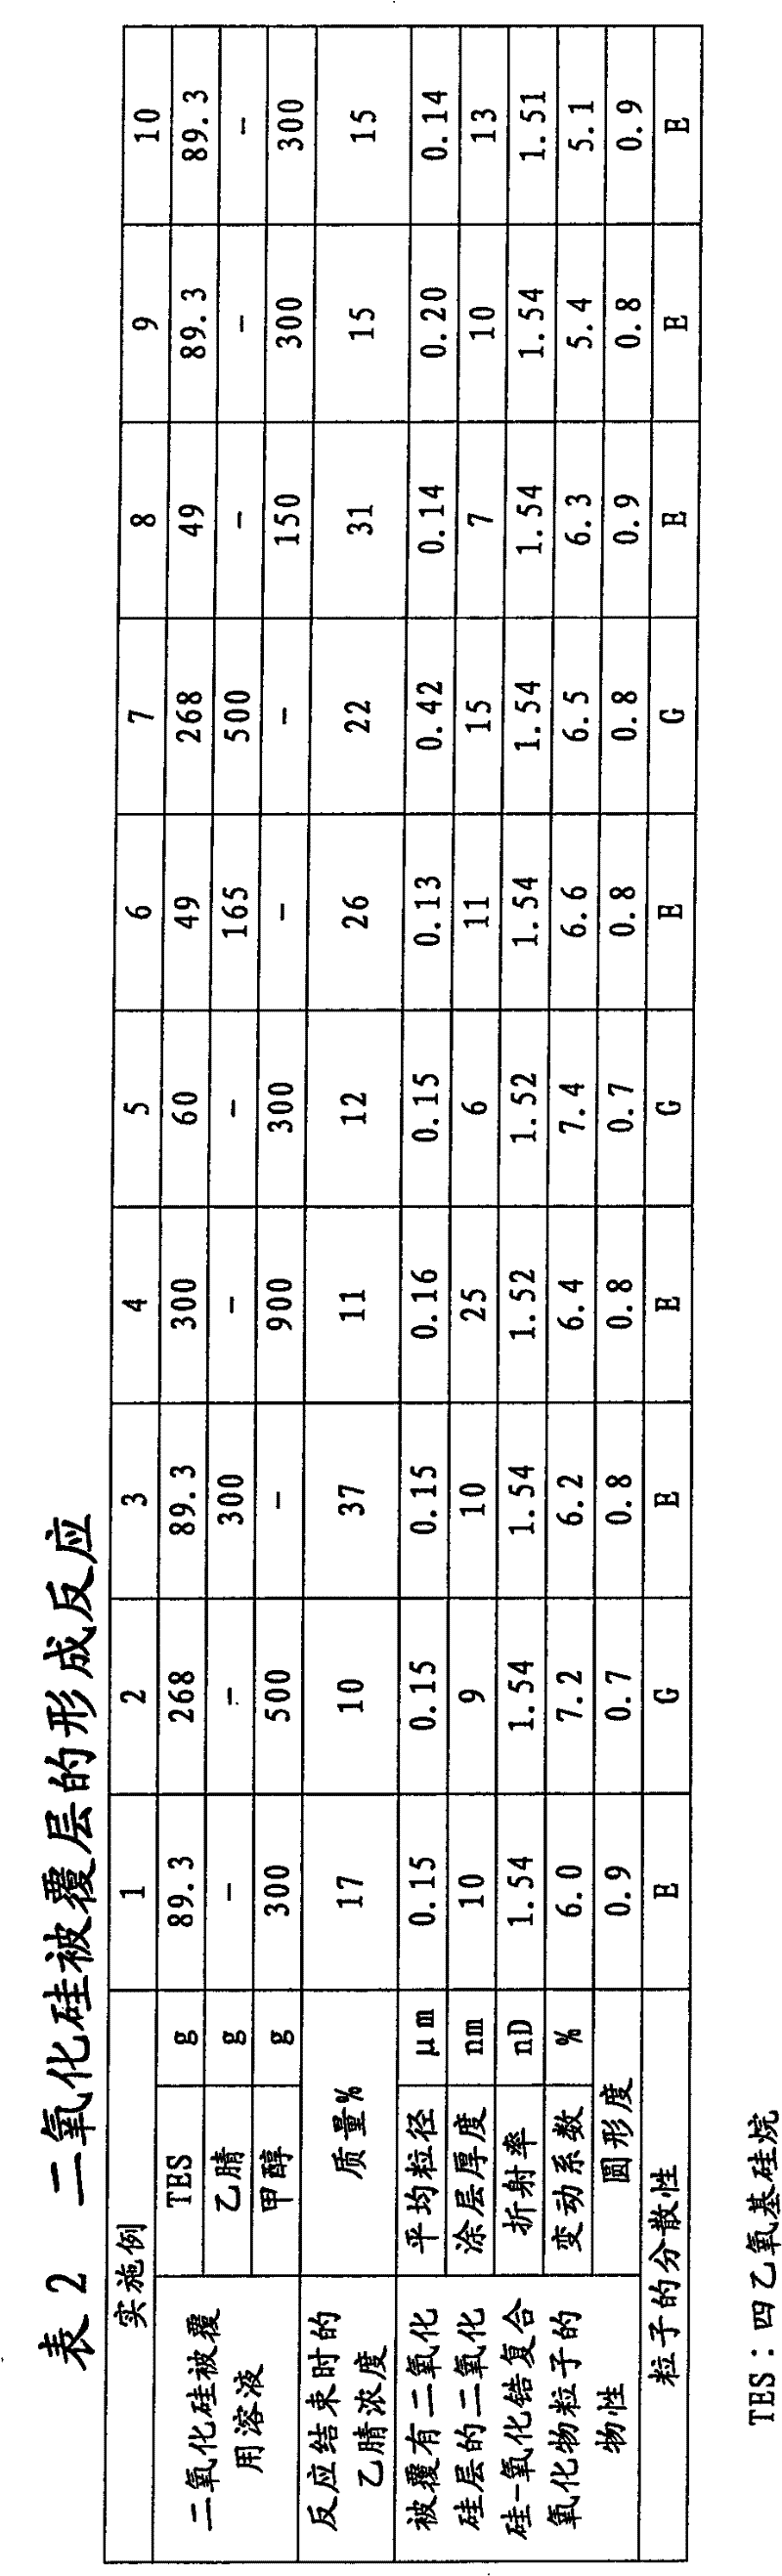 Method for producing silica-zirconia composite particles each coated with silica layer